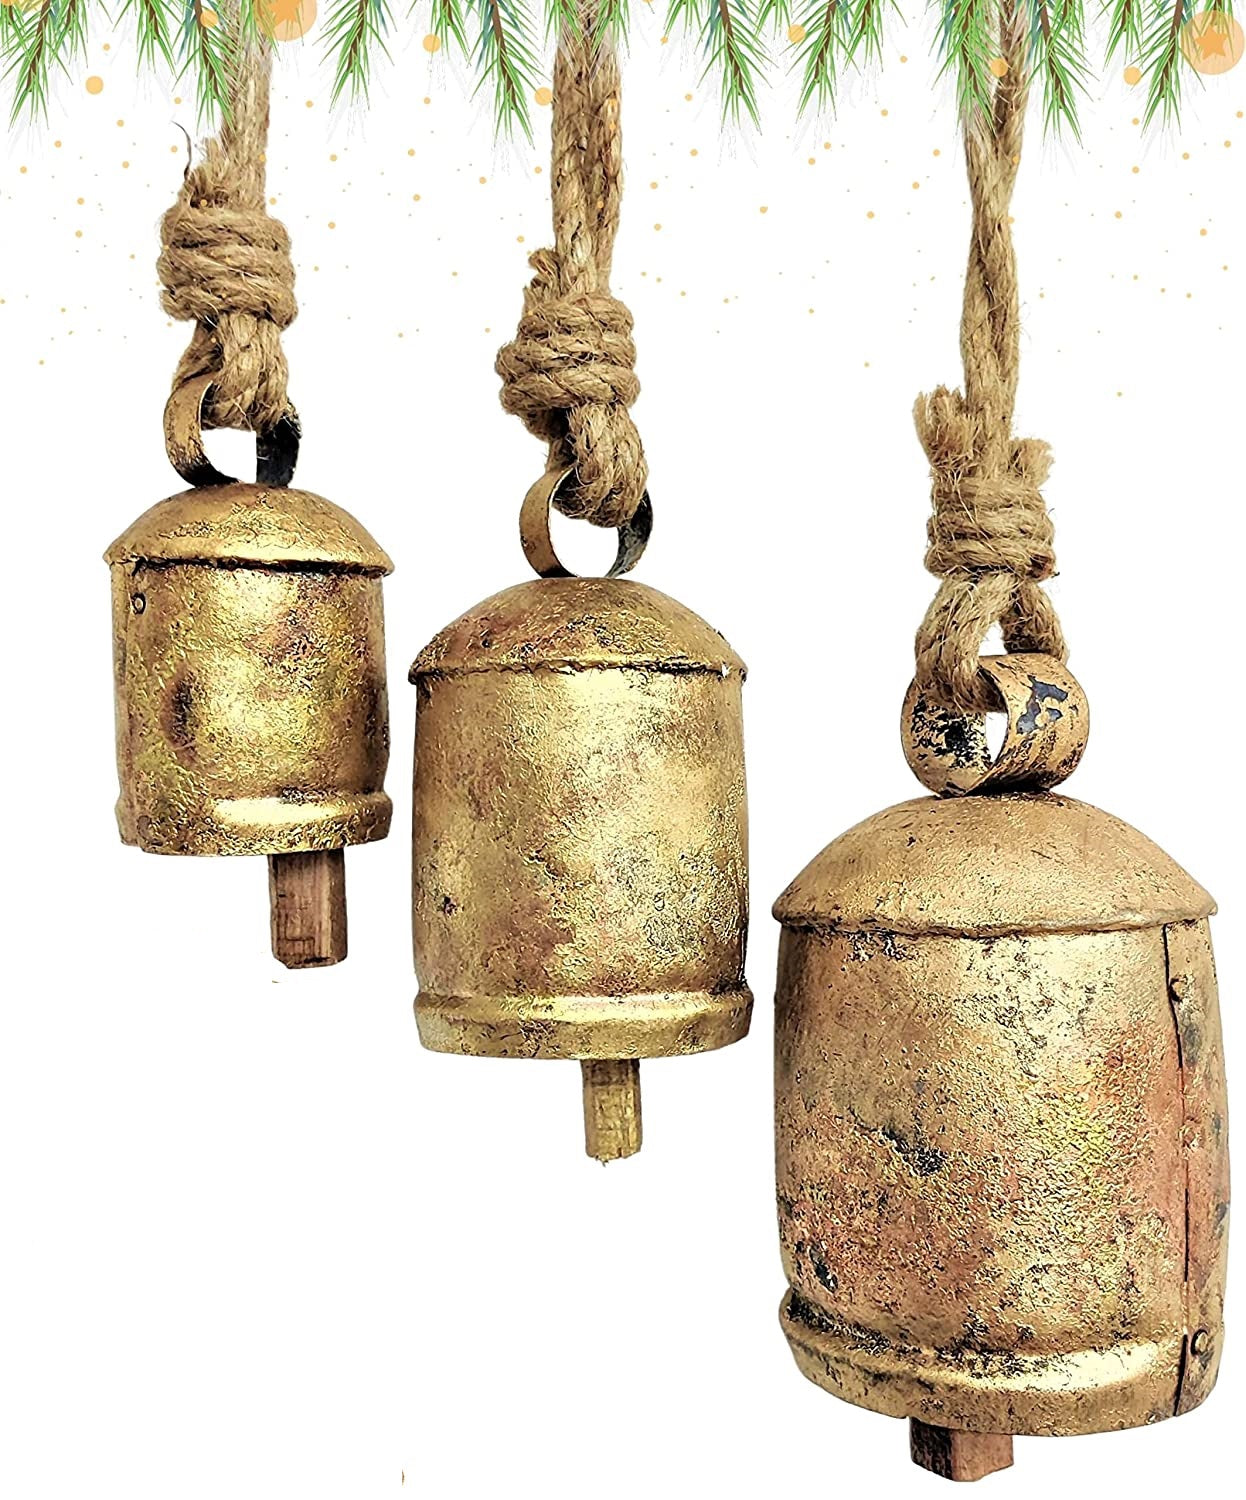 Set of 3 Harmony Cow Bells Vintage Handmade Rustic Lucky Christmas Hanging Bells On Rope